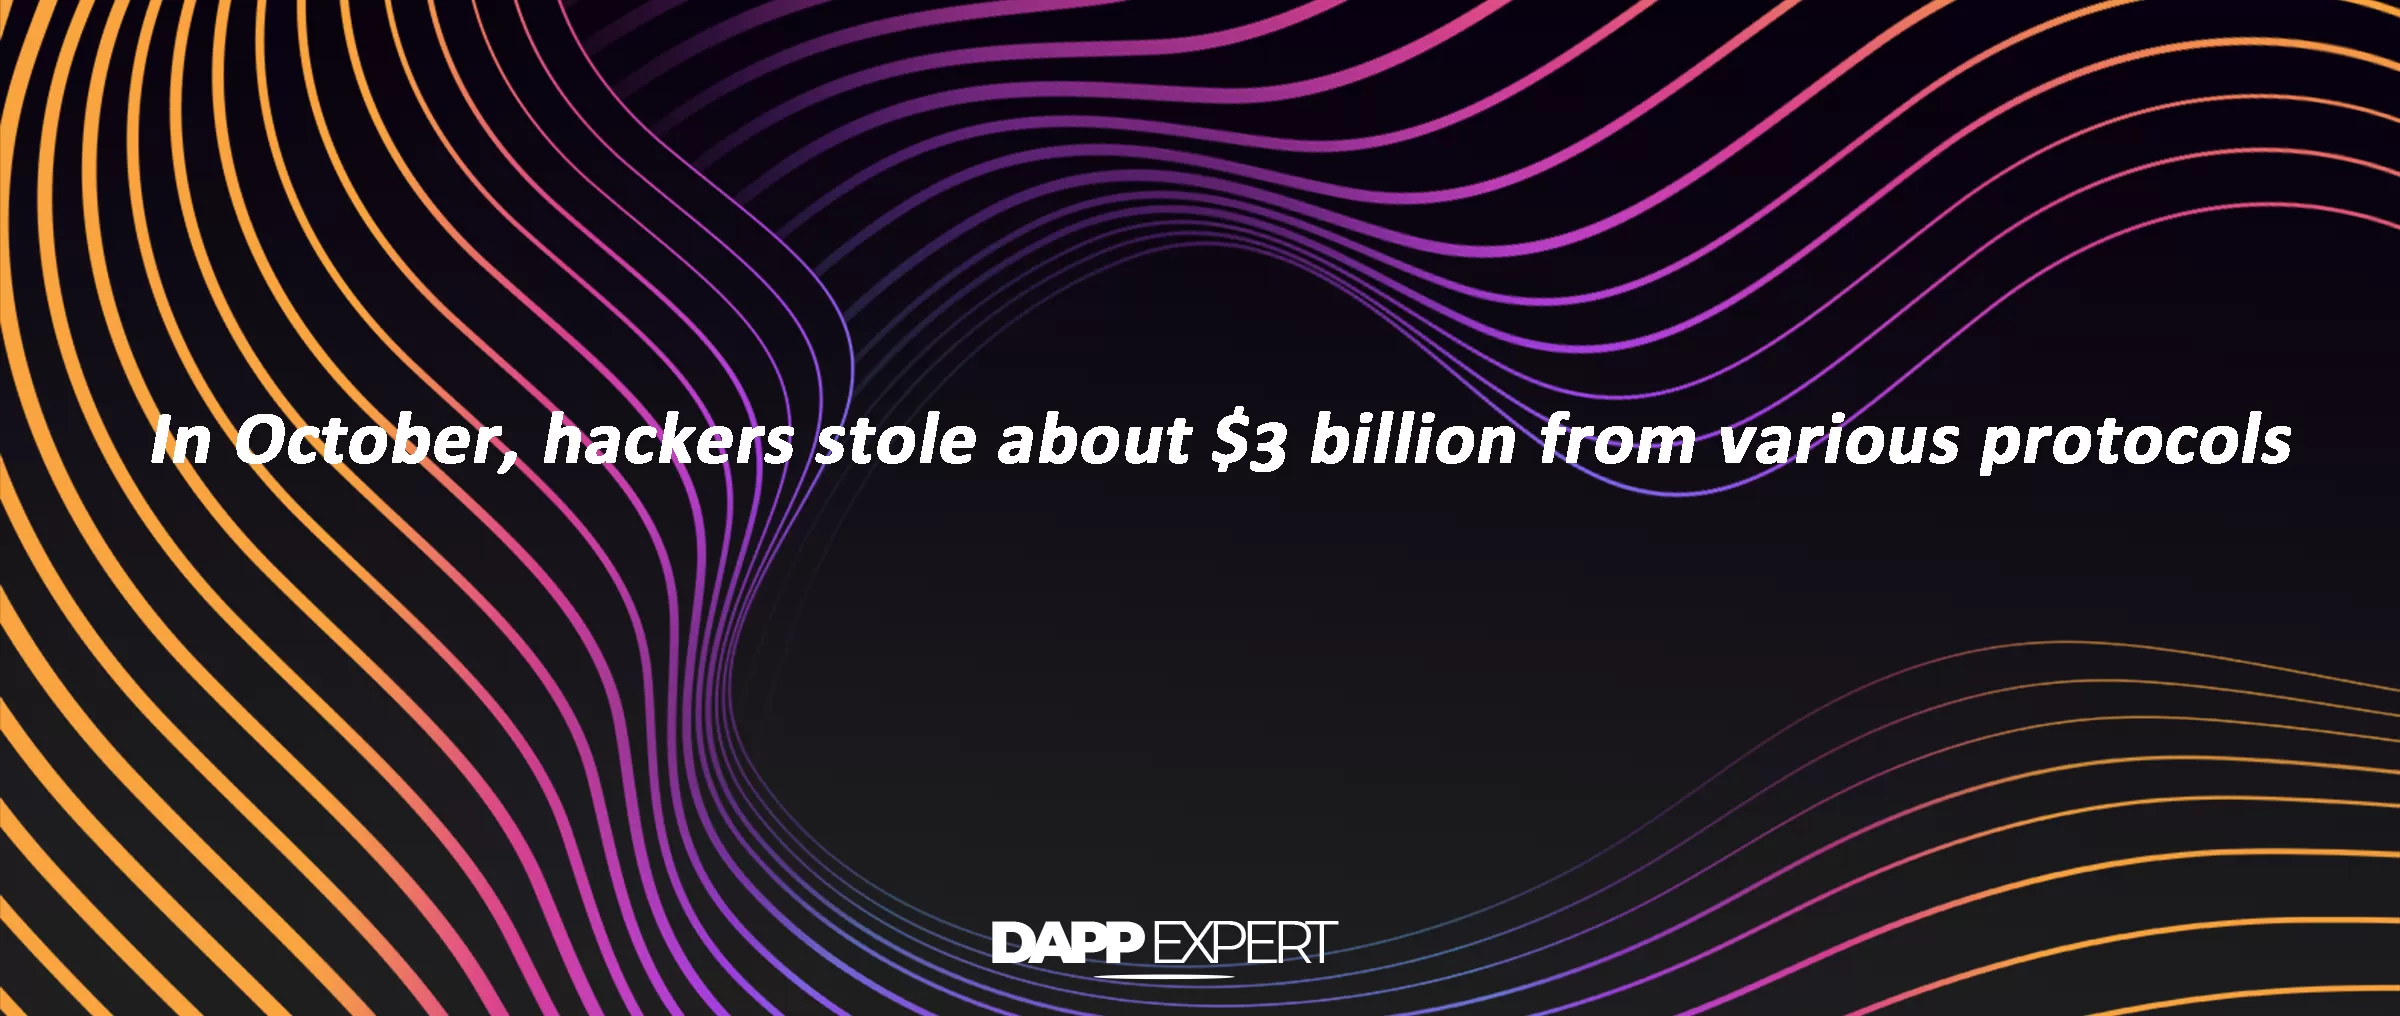 In October, hackers stole about $3 billion from various protocols